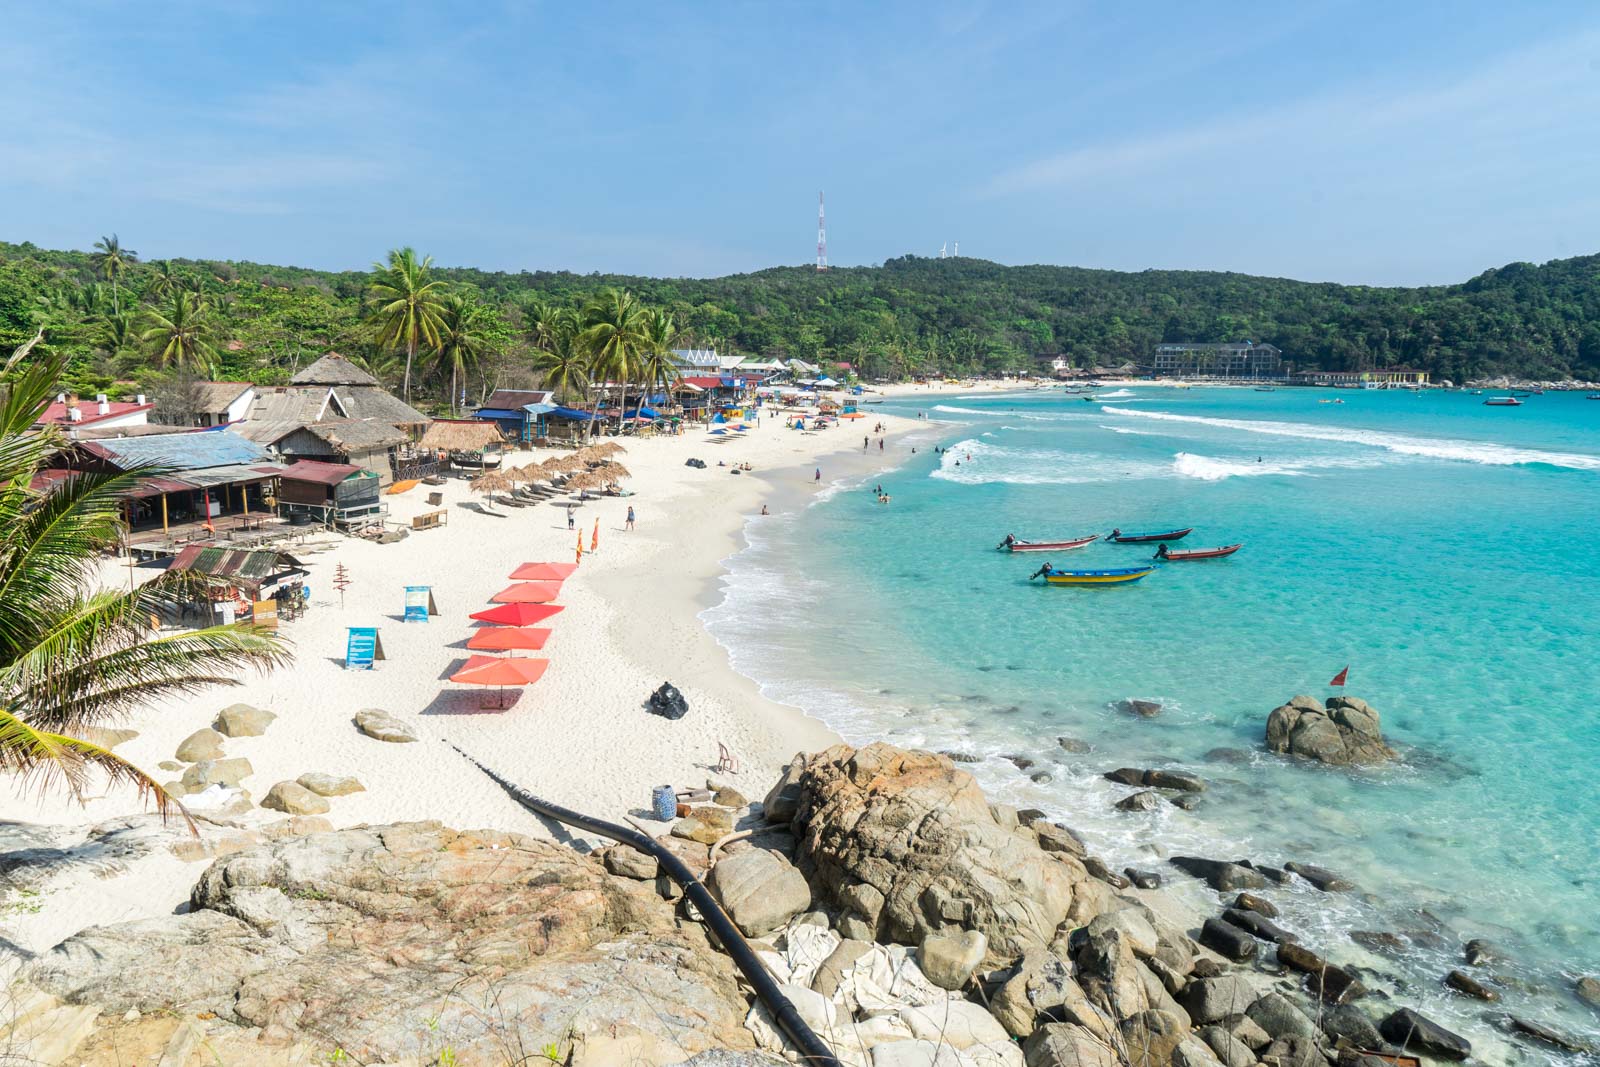 The best way to visit the Perhentian Islands in Malaysia